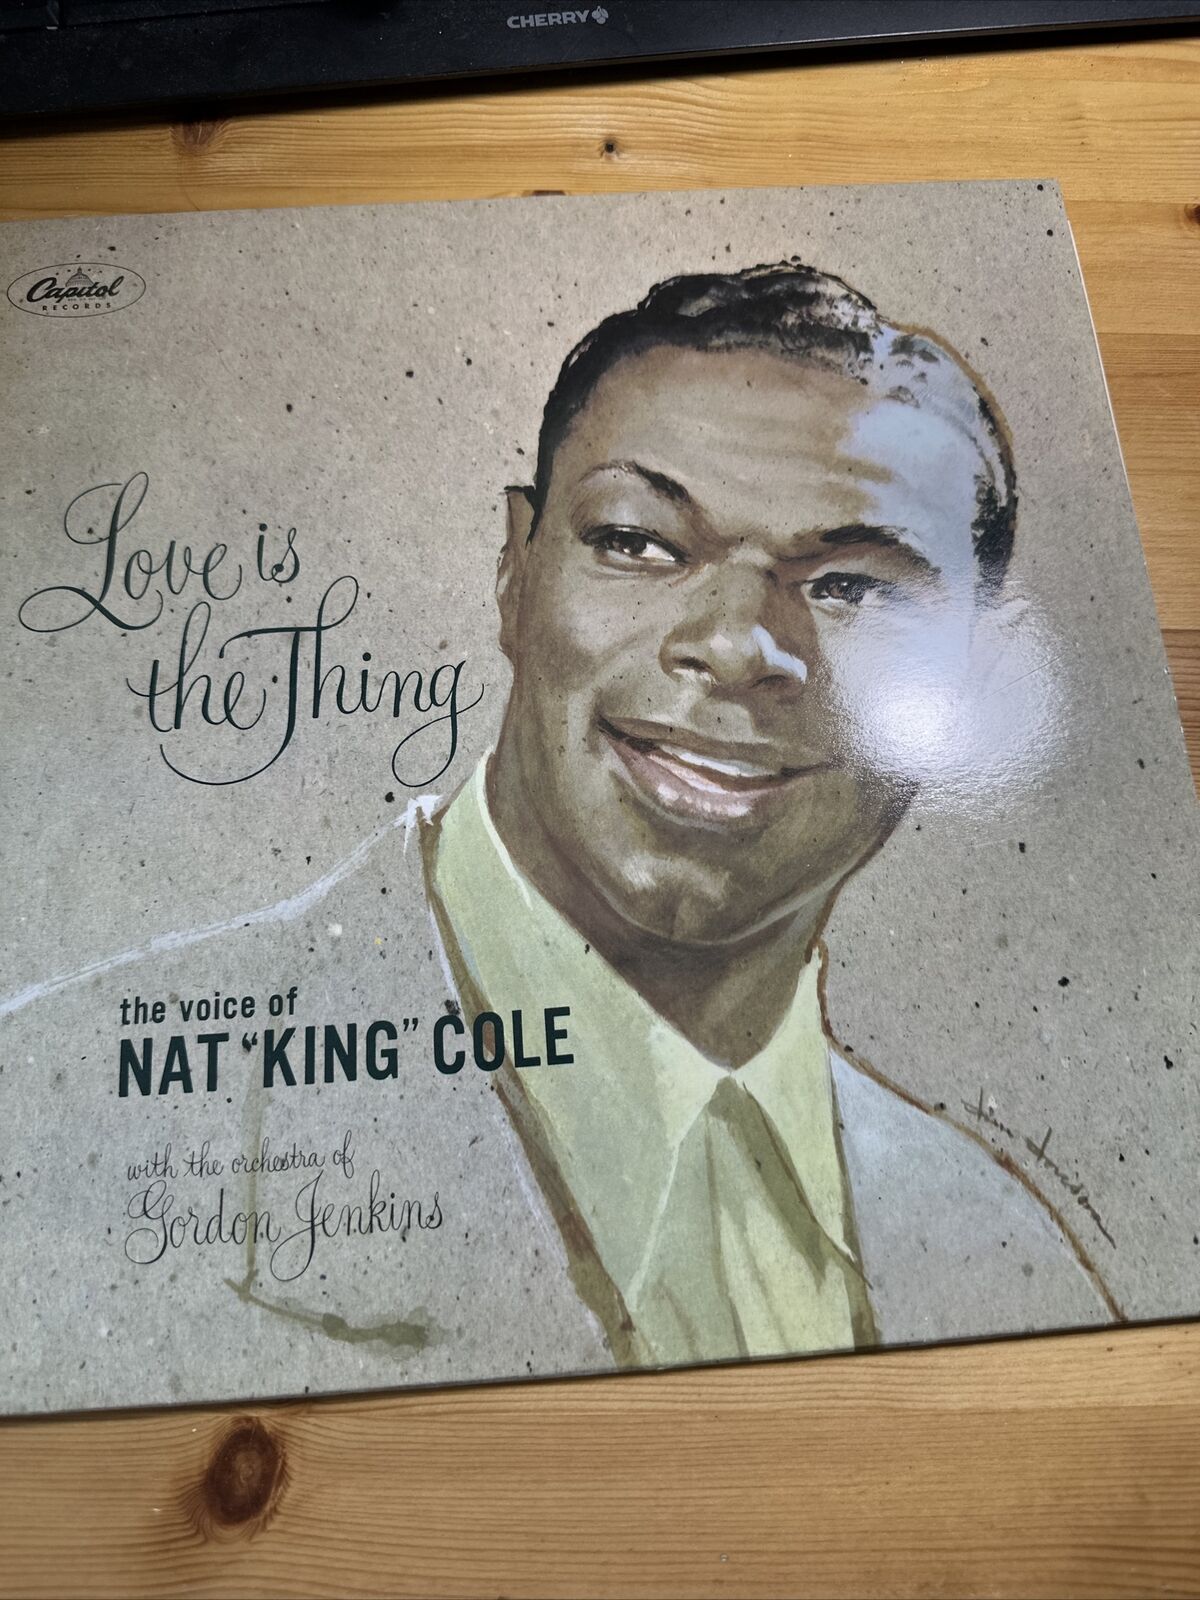 NAT KING COLE REISSUE LOVE IS THE THING VINYL 1980 CAPITOL RECORDS SN-16163 VG++